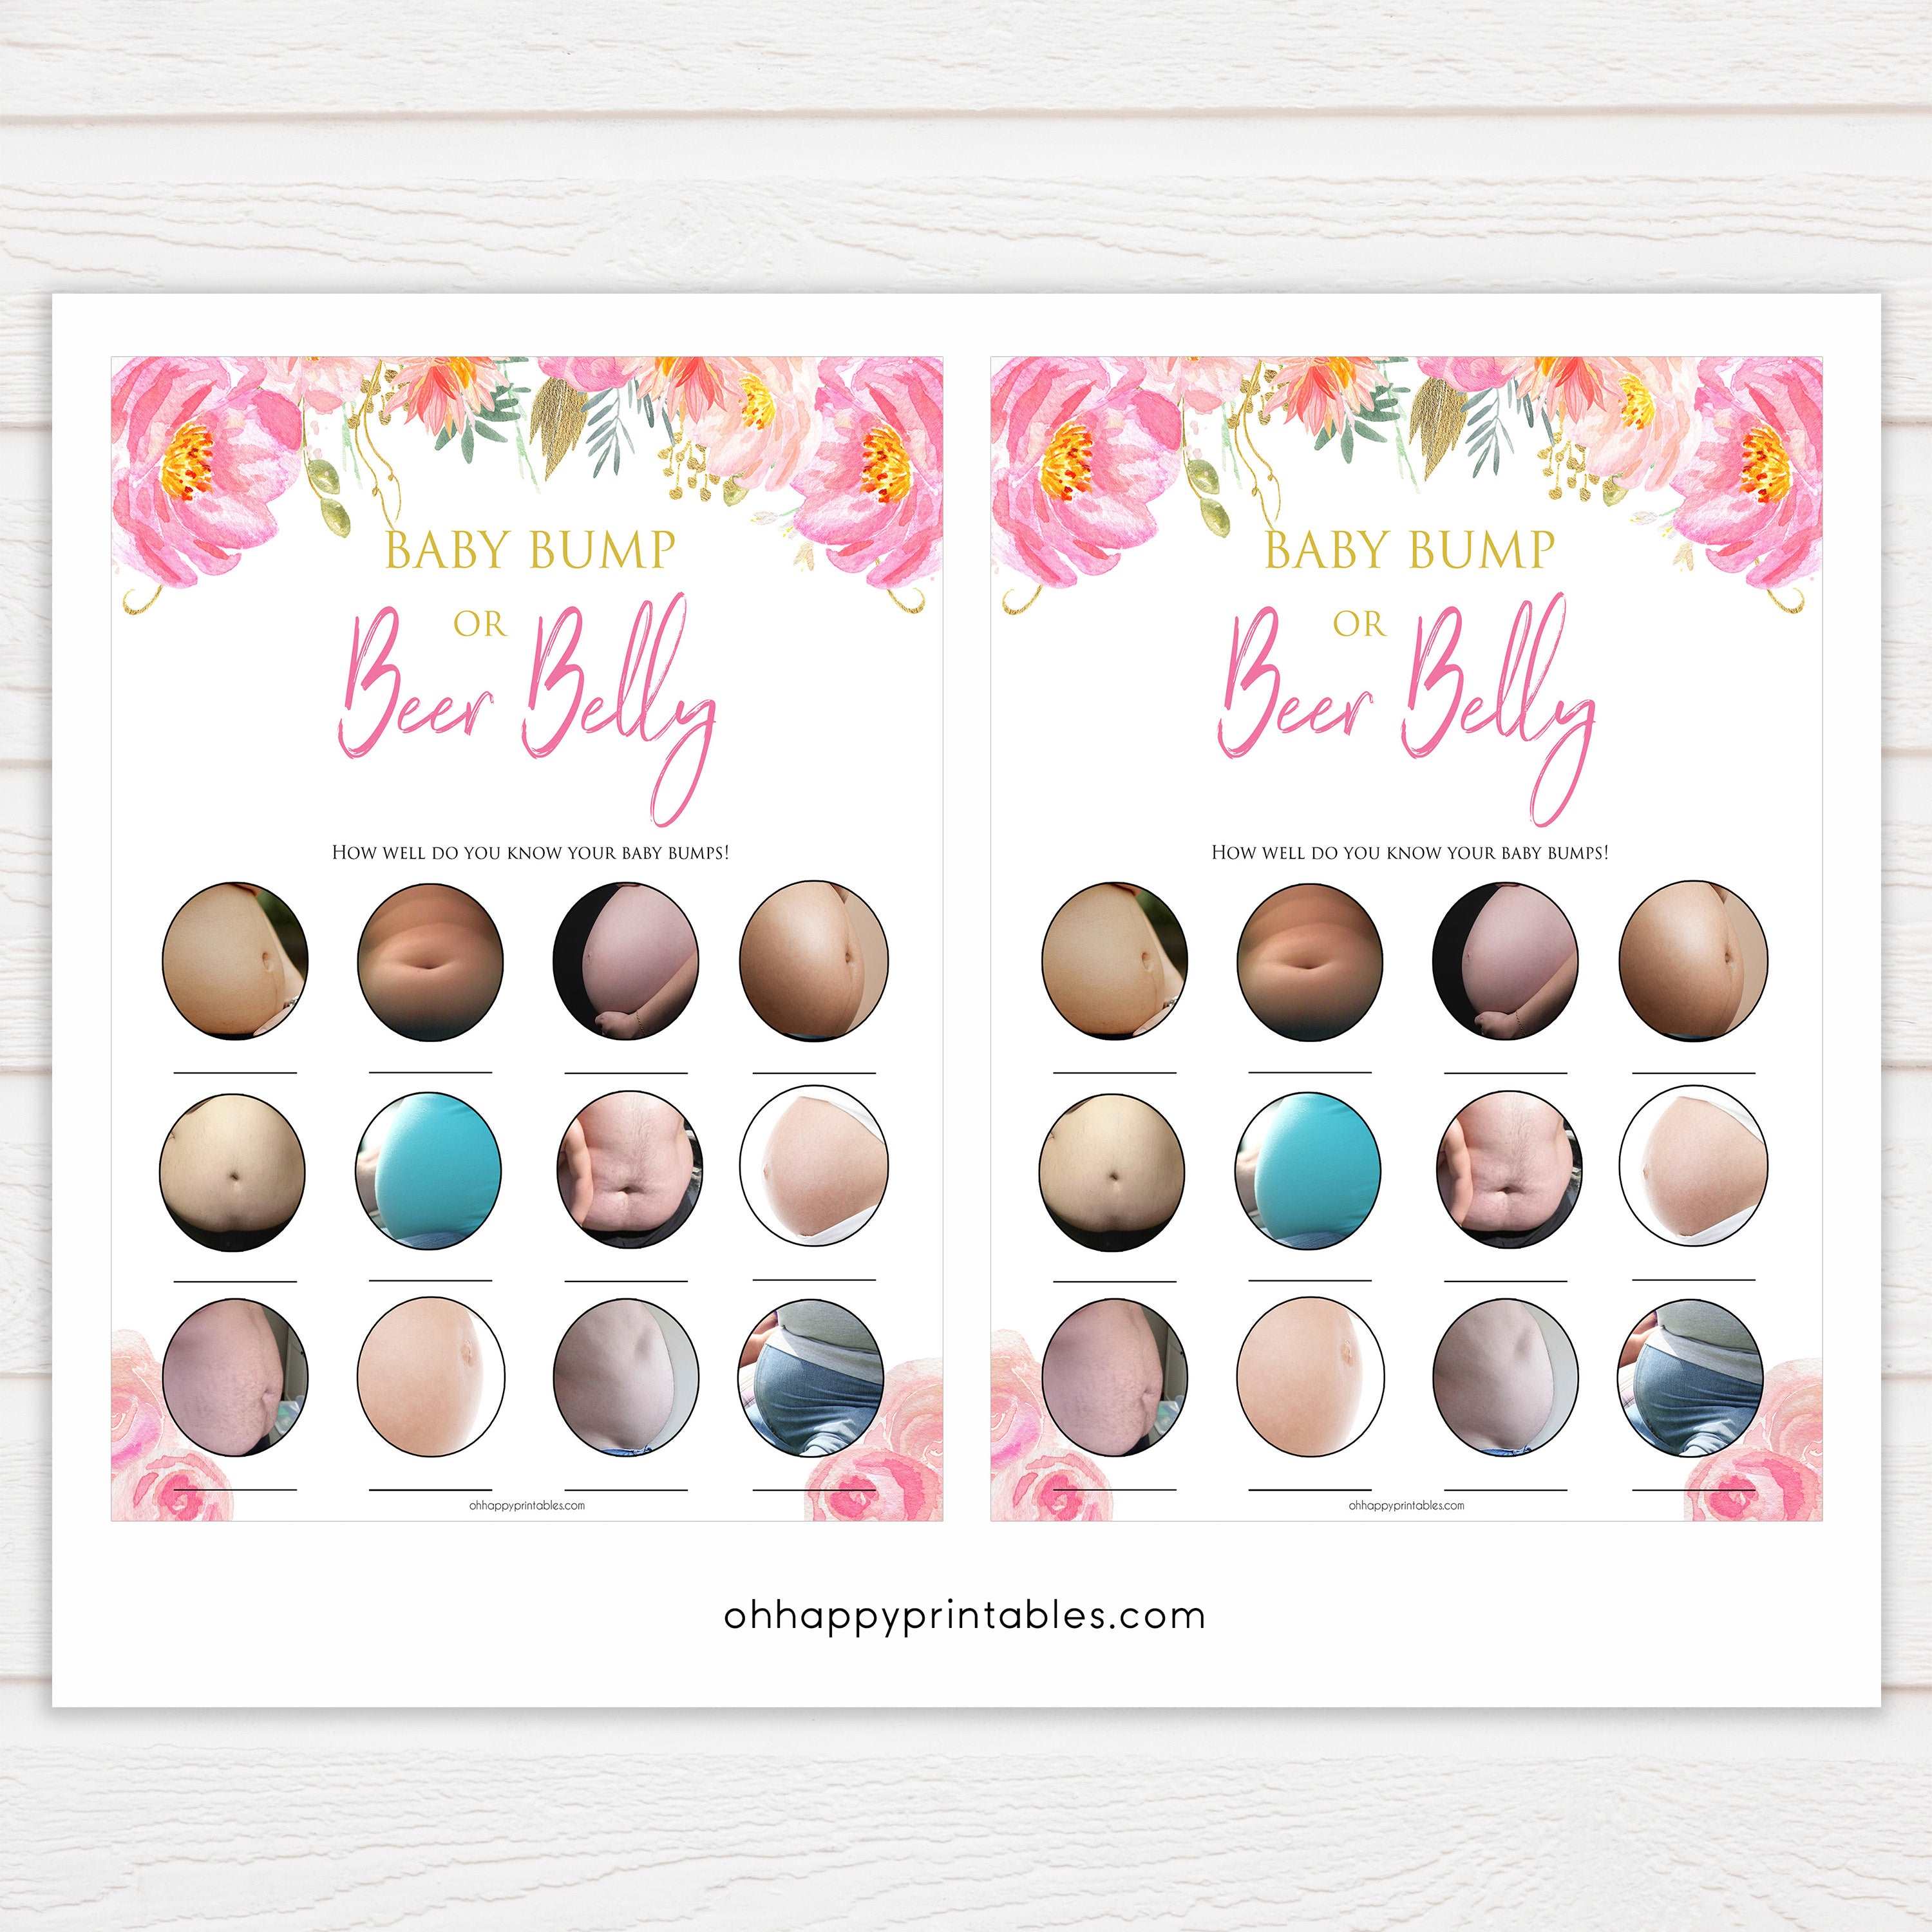 Pink blush floral baby shower game, porn or labor game, boobs butts game, baby bump game, printable baby games, baby shower games, blush baby shower, floral baby games, girl baby shower ideas, pink baby shower ideas, floral baby games, popular baby games, fun baby games